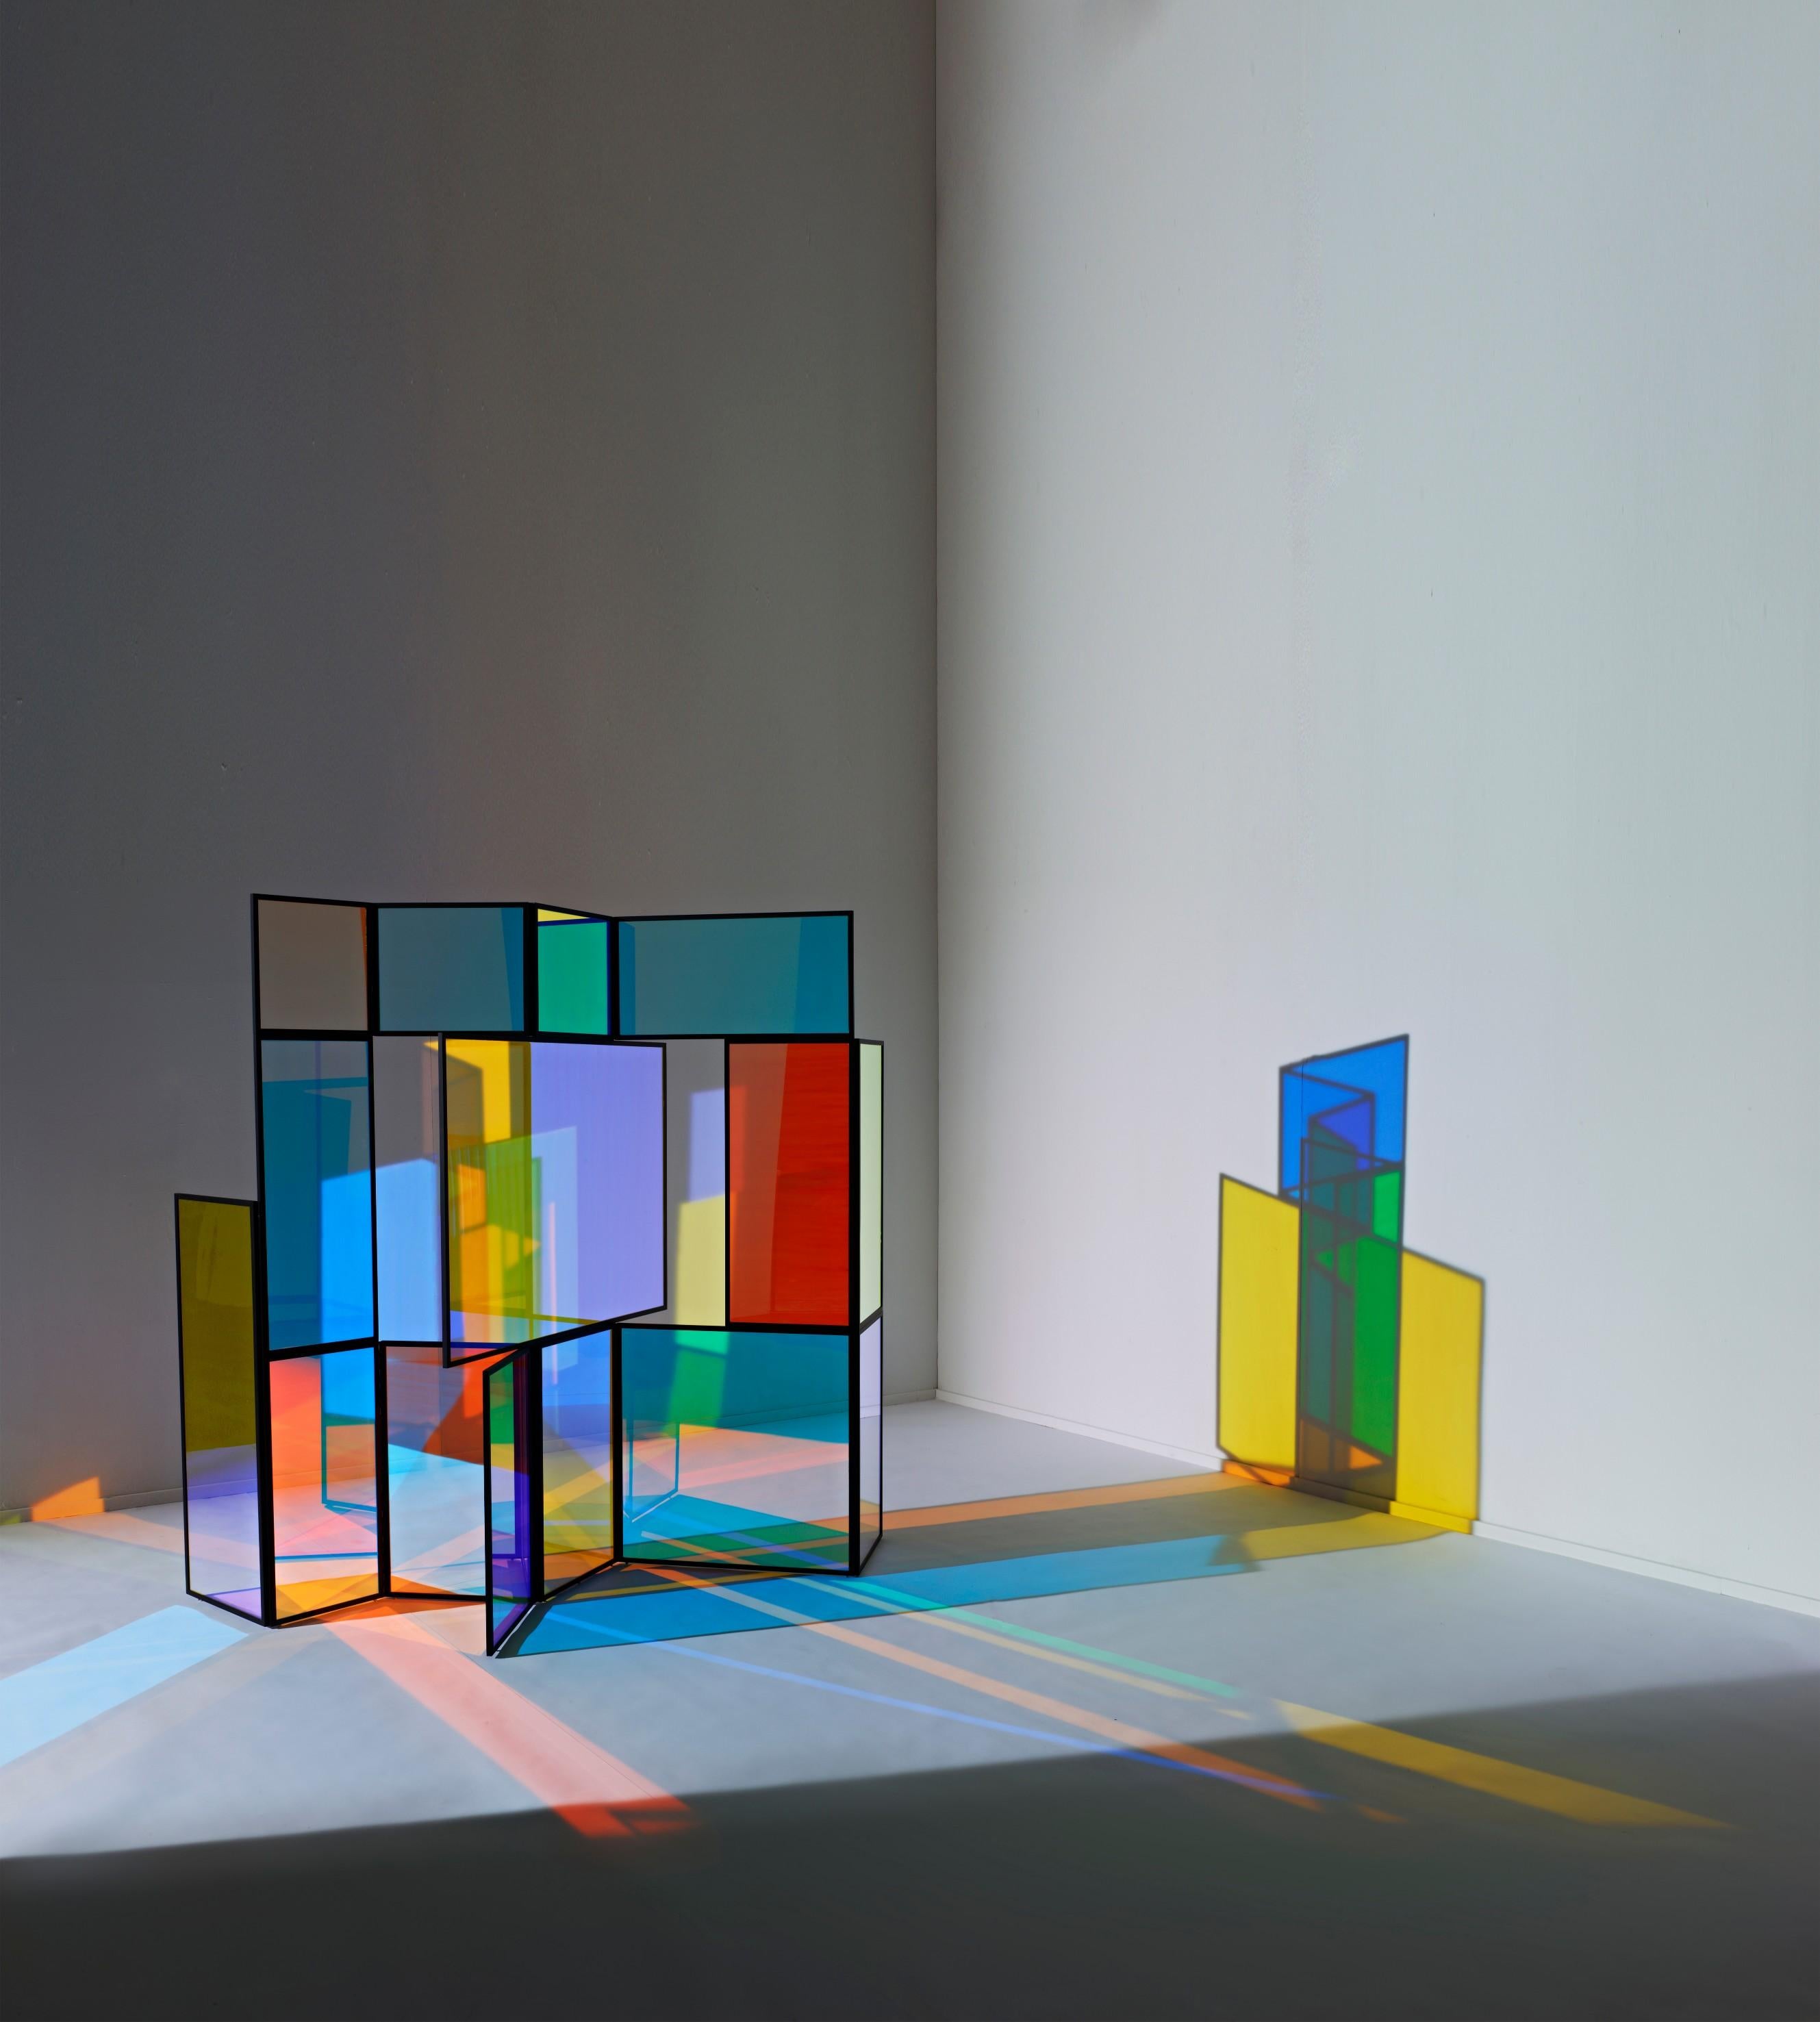 Dichroic glass colorful folding screen by Camilla Richter
Folding screen ‘And A And Be And Not’
powder-coated steel, dichroic glass: cyan and orange
1600 x 1600 x 710 mm
limited edition of 5 + 1 AP

Camilla Richter's works were published in